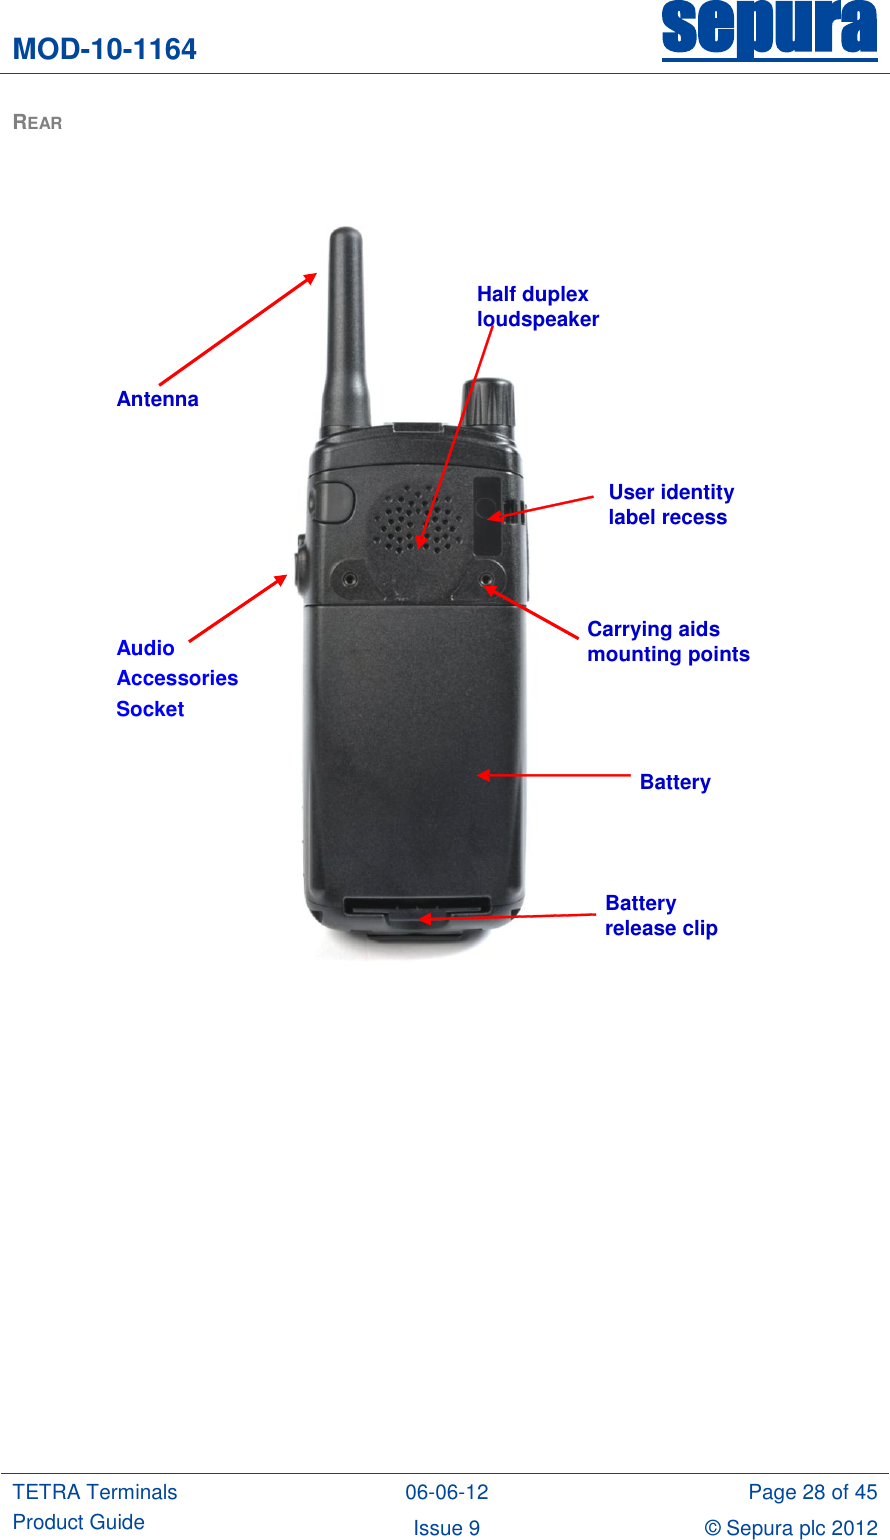 MOD-10-1164 sepura  TETRA Terminals Product Guide 06-06-12 Page 28 of 45 Issue 9 © Sepura plc 2012   REAR                  Half duplex  loudspeaker Antenna   User identity  label recess Carrying aids  mounting points Battery Battery  release clip Audio Accessories Socket 